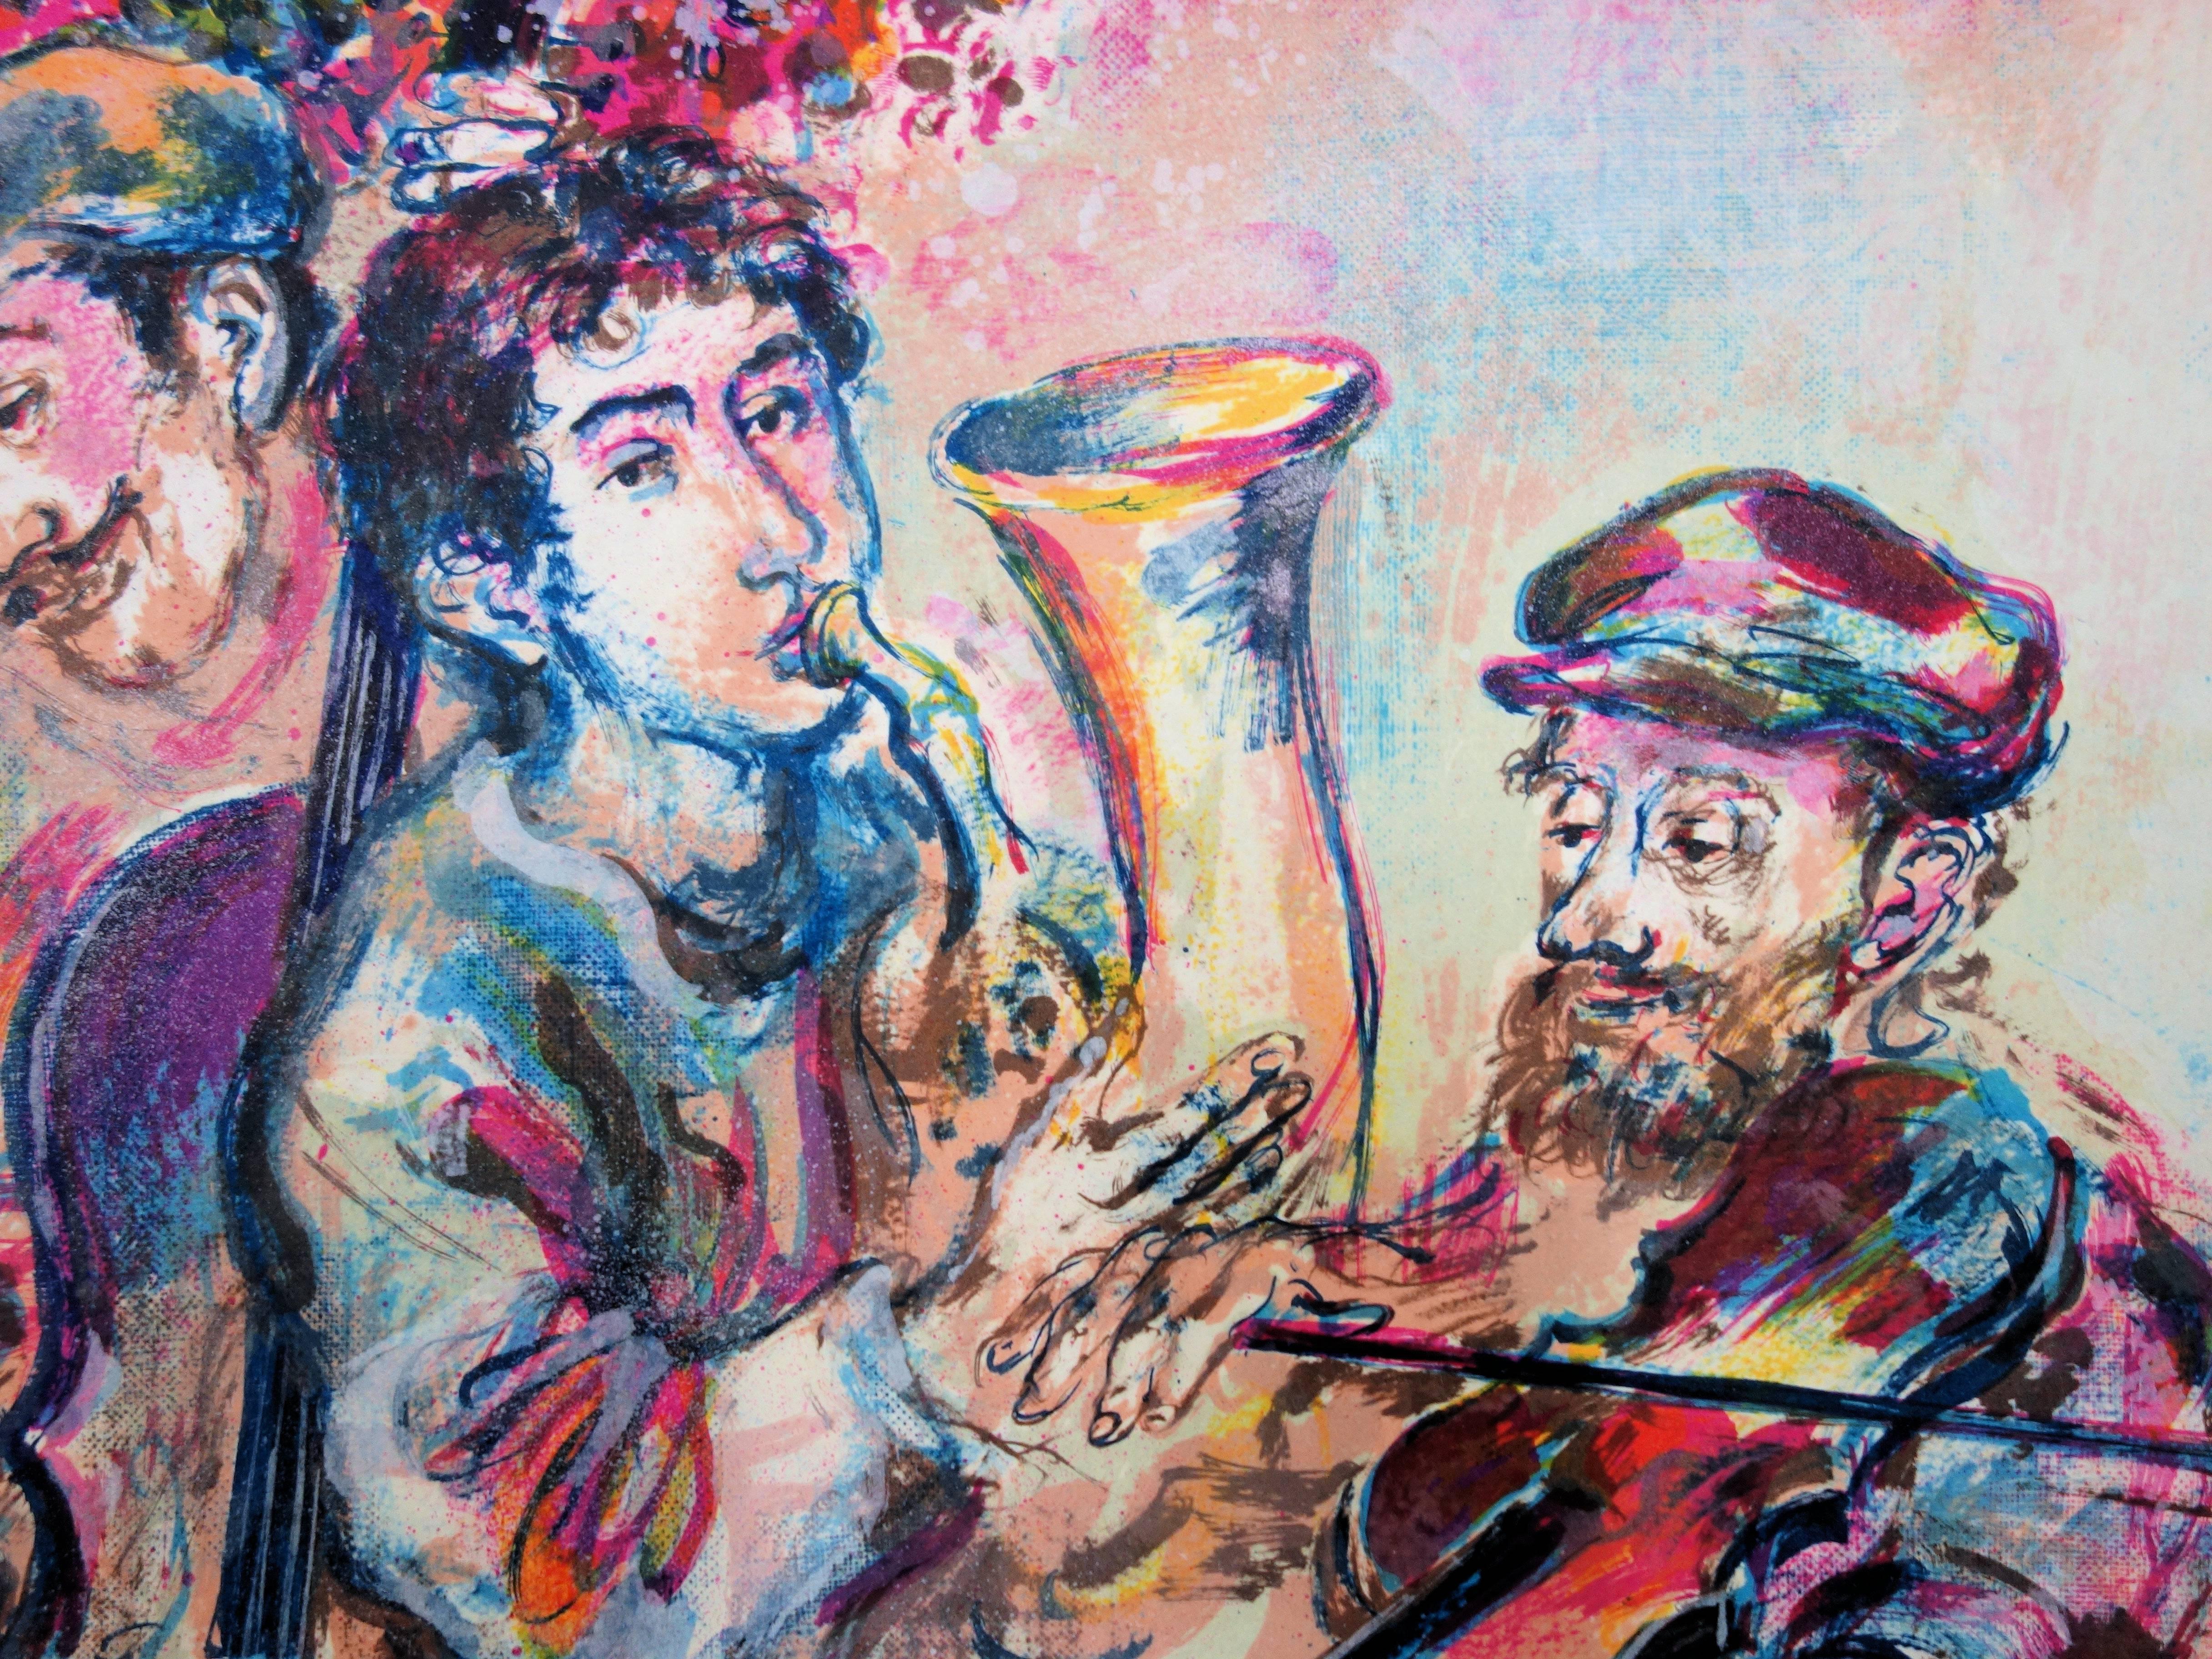 Jewish Wedding - Handsigned lithograph /75 ex For Sale 2